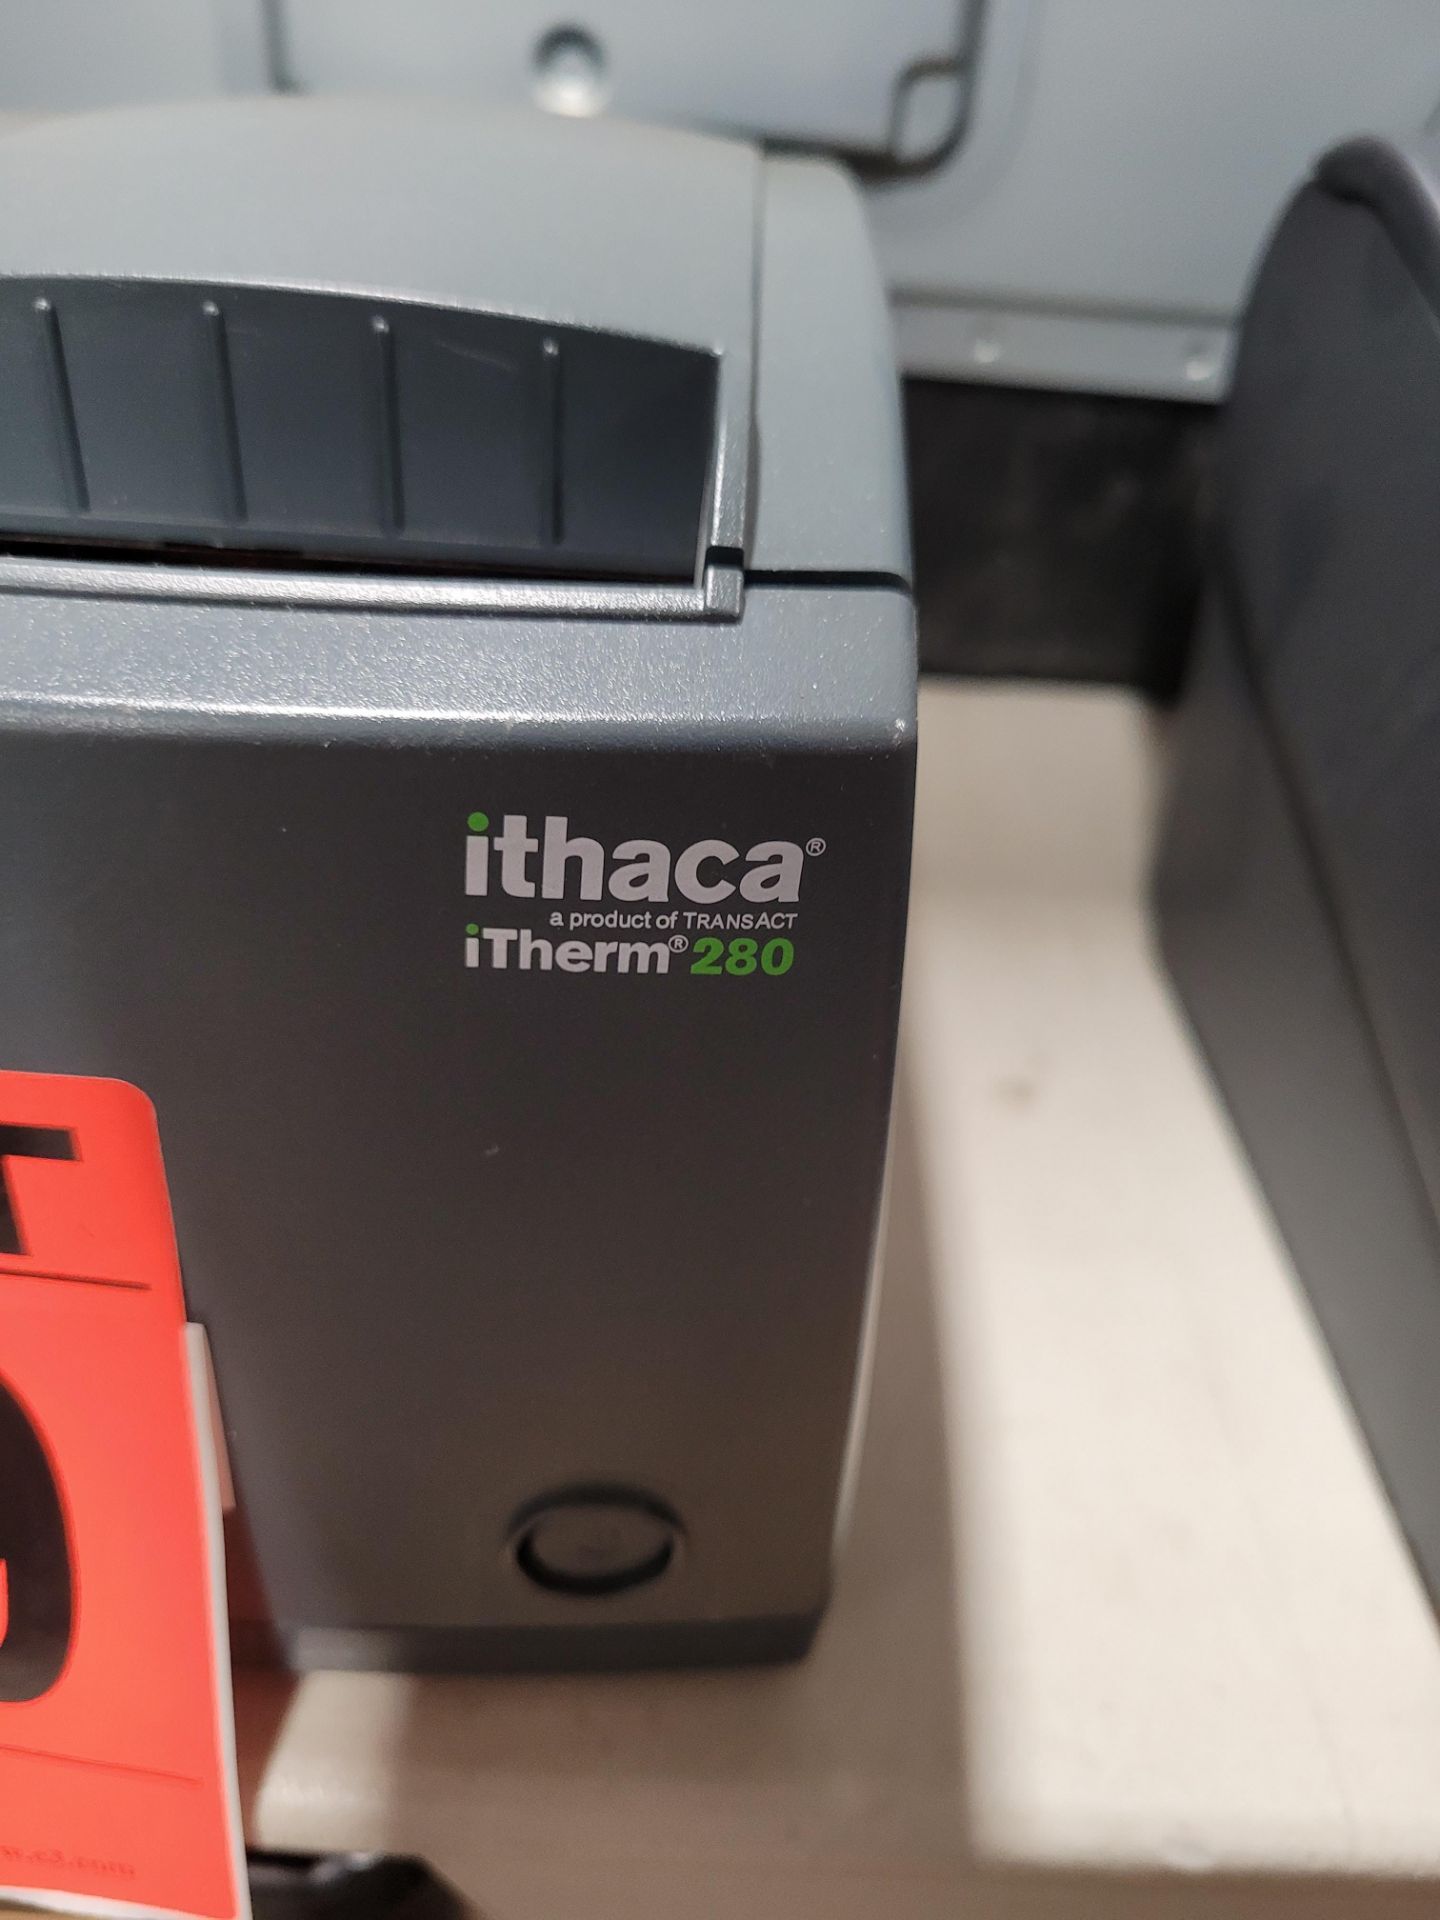 ITHICA thermal printer mod. ITherm280 - Image 2 of 2